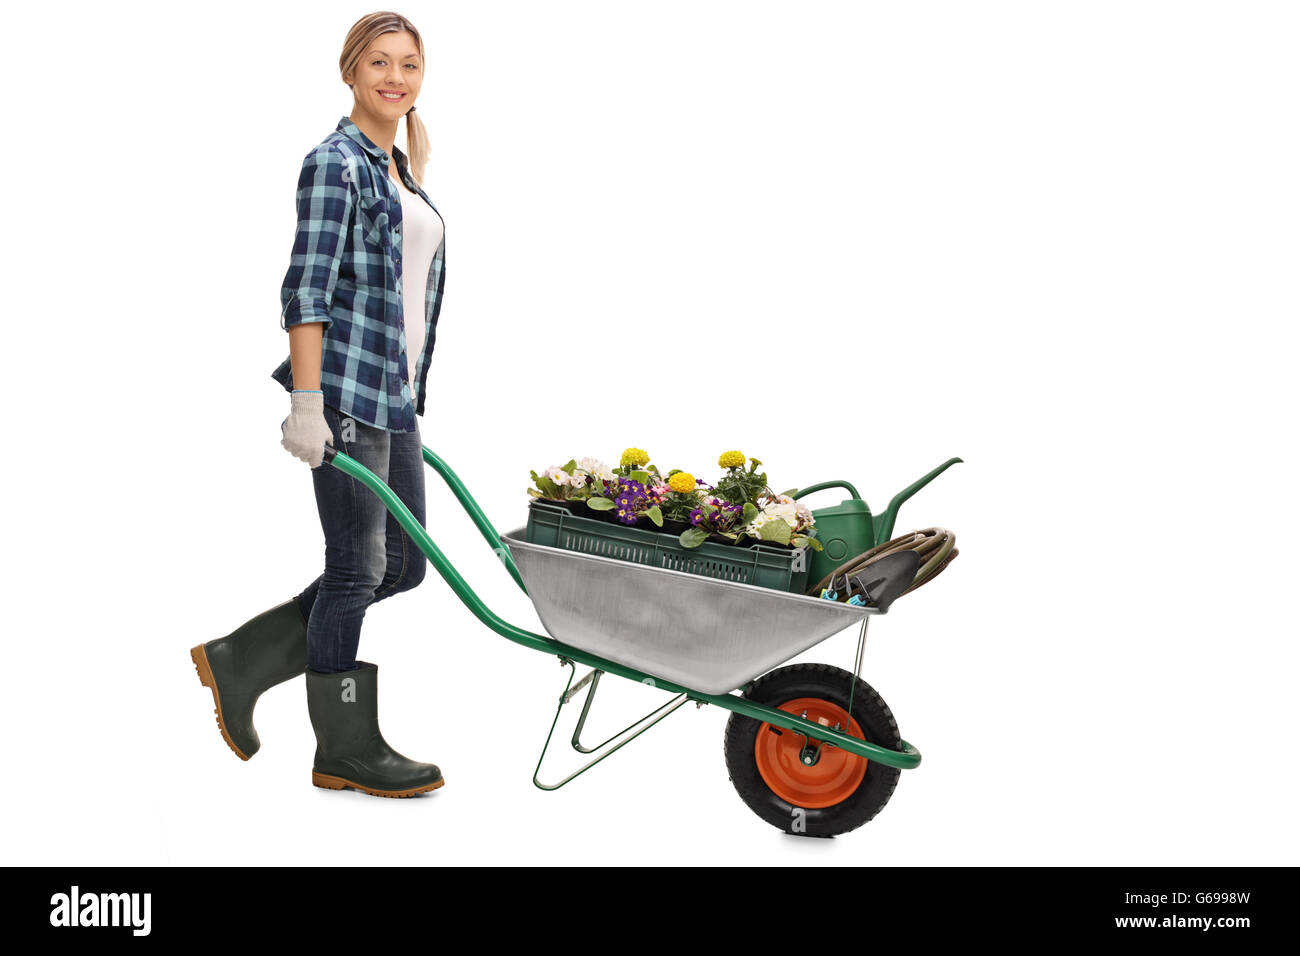 Full length portrait of a young woman pushing a wheelbarrow with gardening equipment isolated on white background Stock Photo